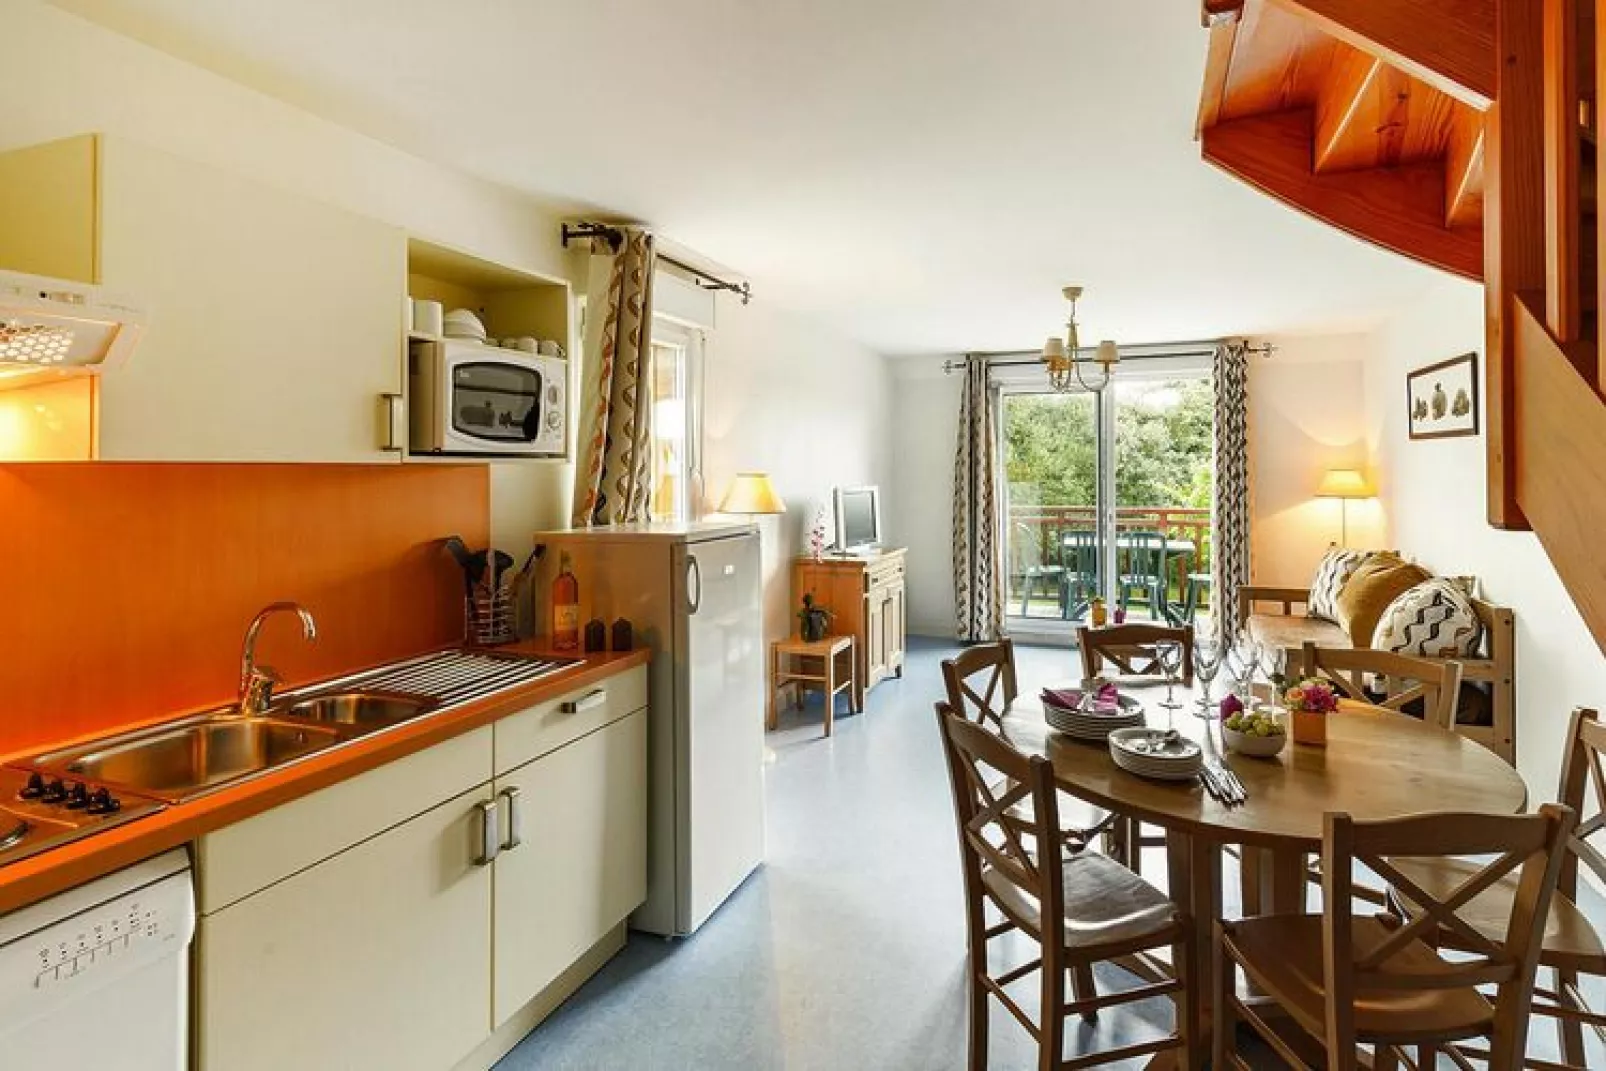 Studio in the Residence Les Roches Douvres, St. Briac-sur-Mer-Keuken